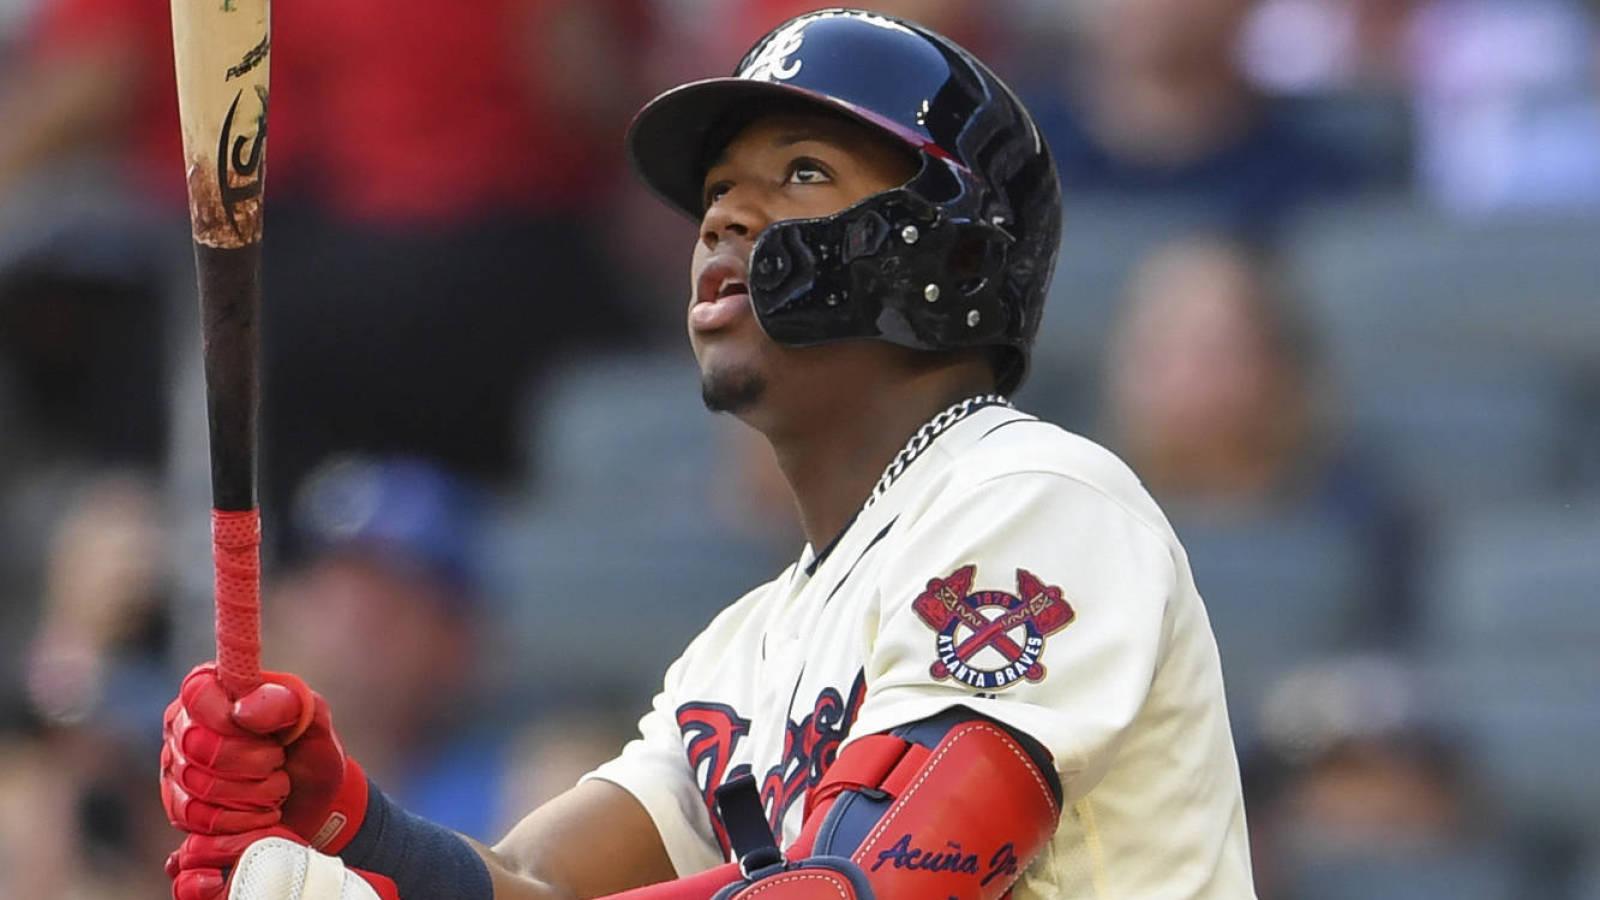 Watch: Ronald Acuna sets Braves record for leadoff HRs in a season